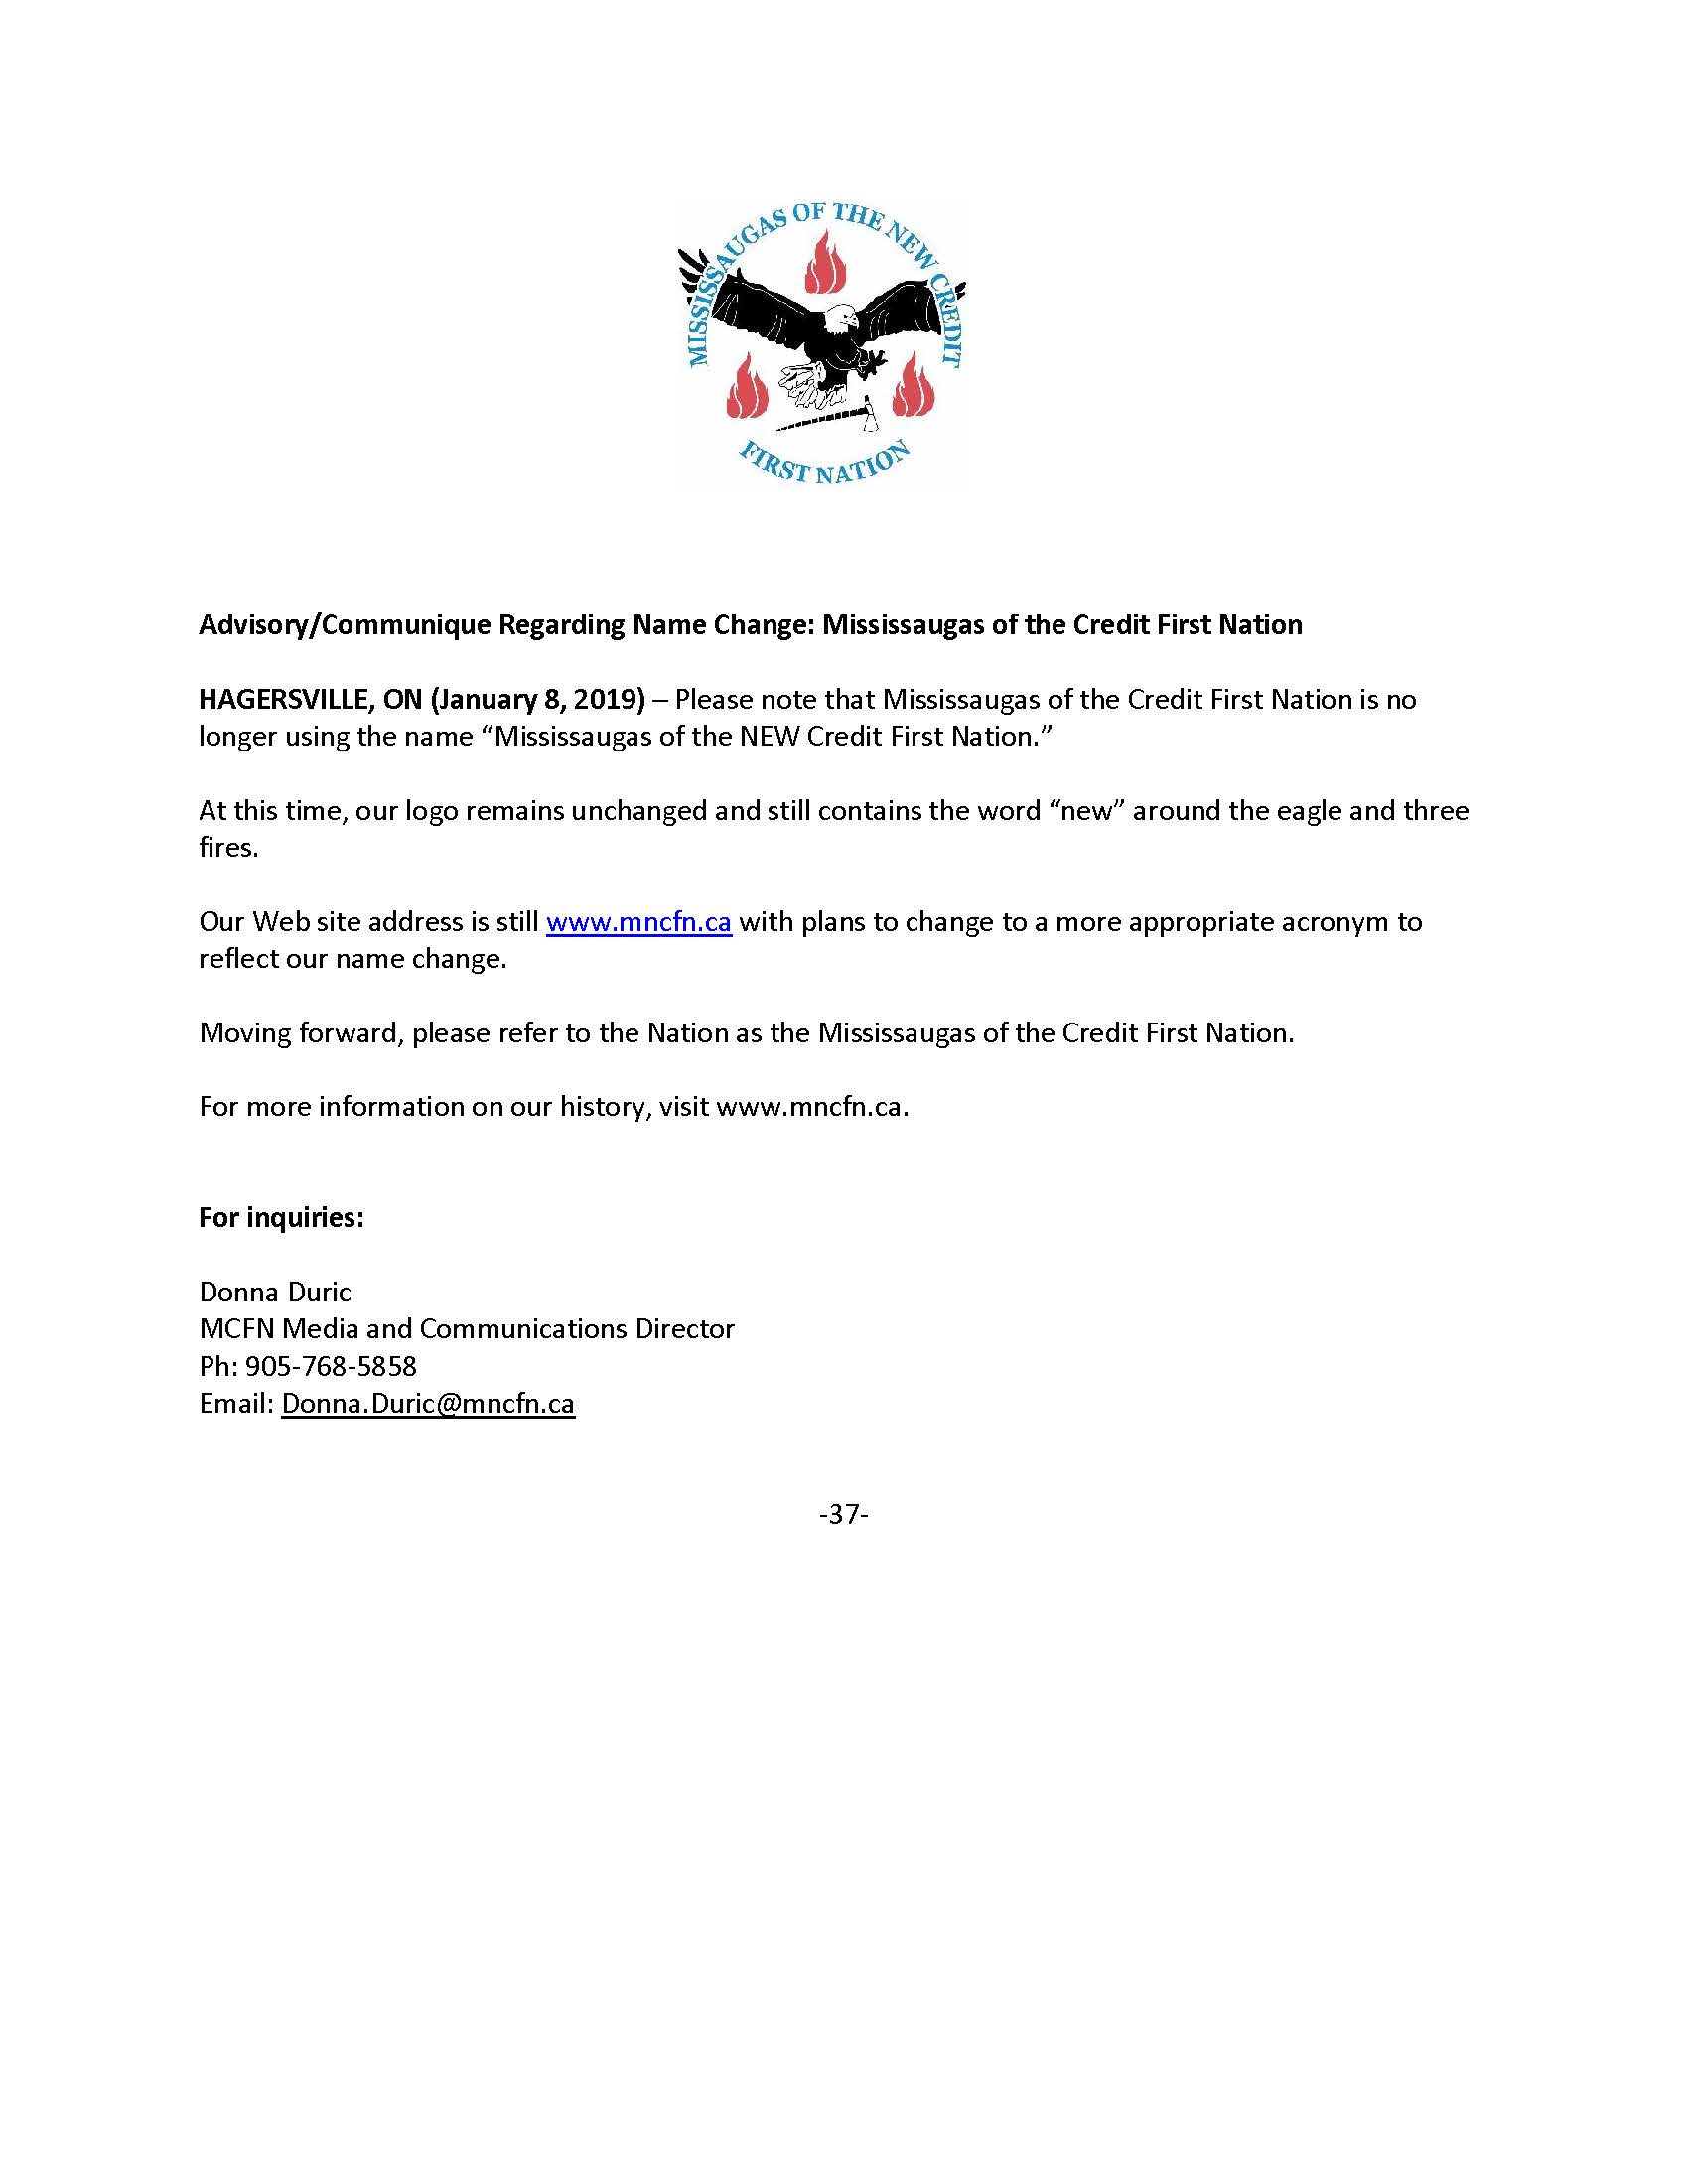 Notice: Mississaugas of the Credit First Nation Name Change